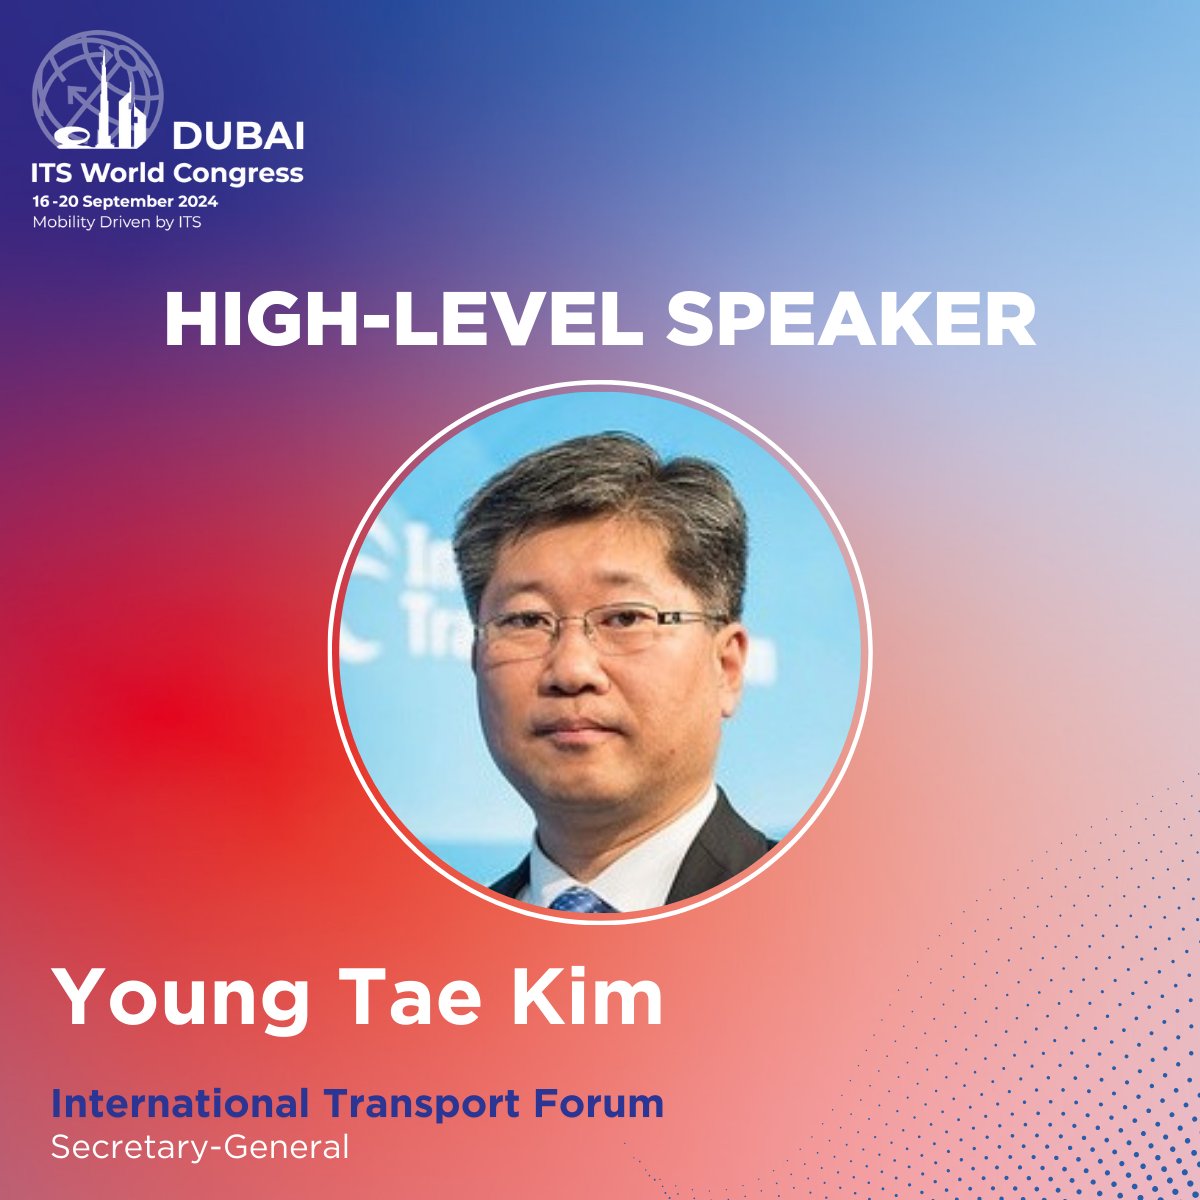 📢 We are delighted to announce the participation of Dr. @Young_T_KIM, Secretary-General of @ITF_Forum, as one of our esteemed High-Level speakers at #ITSDubai2024. Join us as he shares his expertise on global transport policy. Register now: itsworldcongress.com/registration/